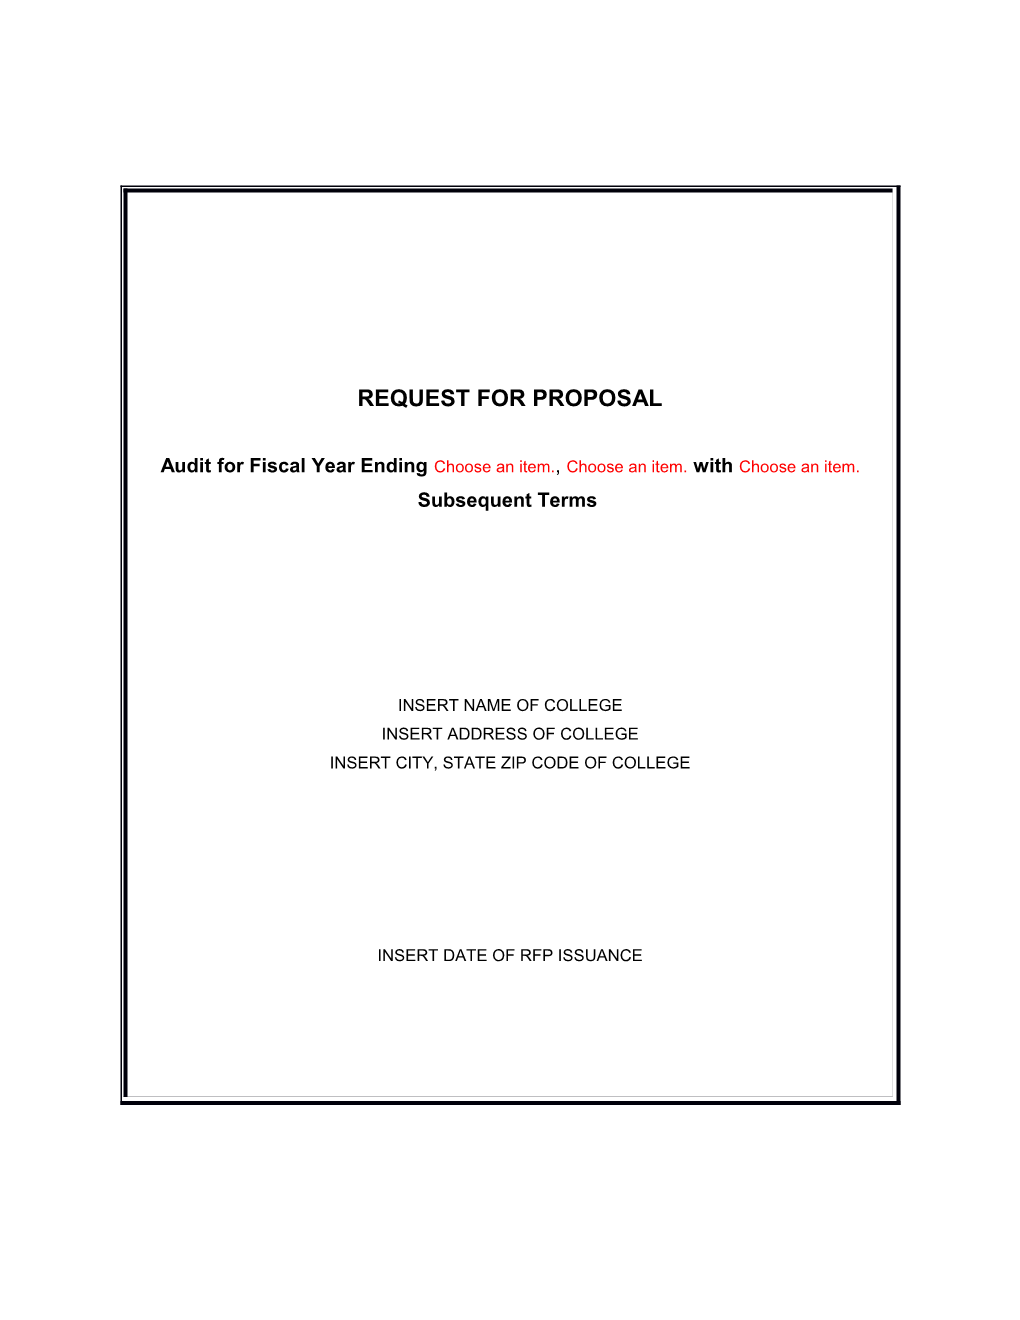 Request for Proposal Audit for Fiscal Year Ending August 31,1996